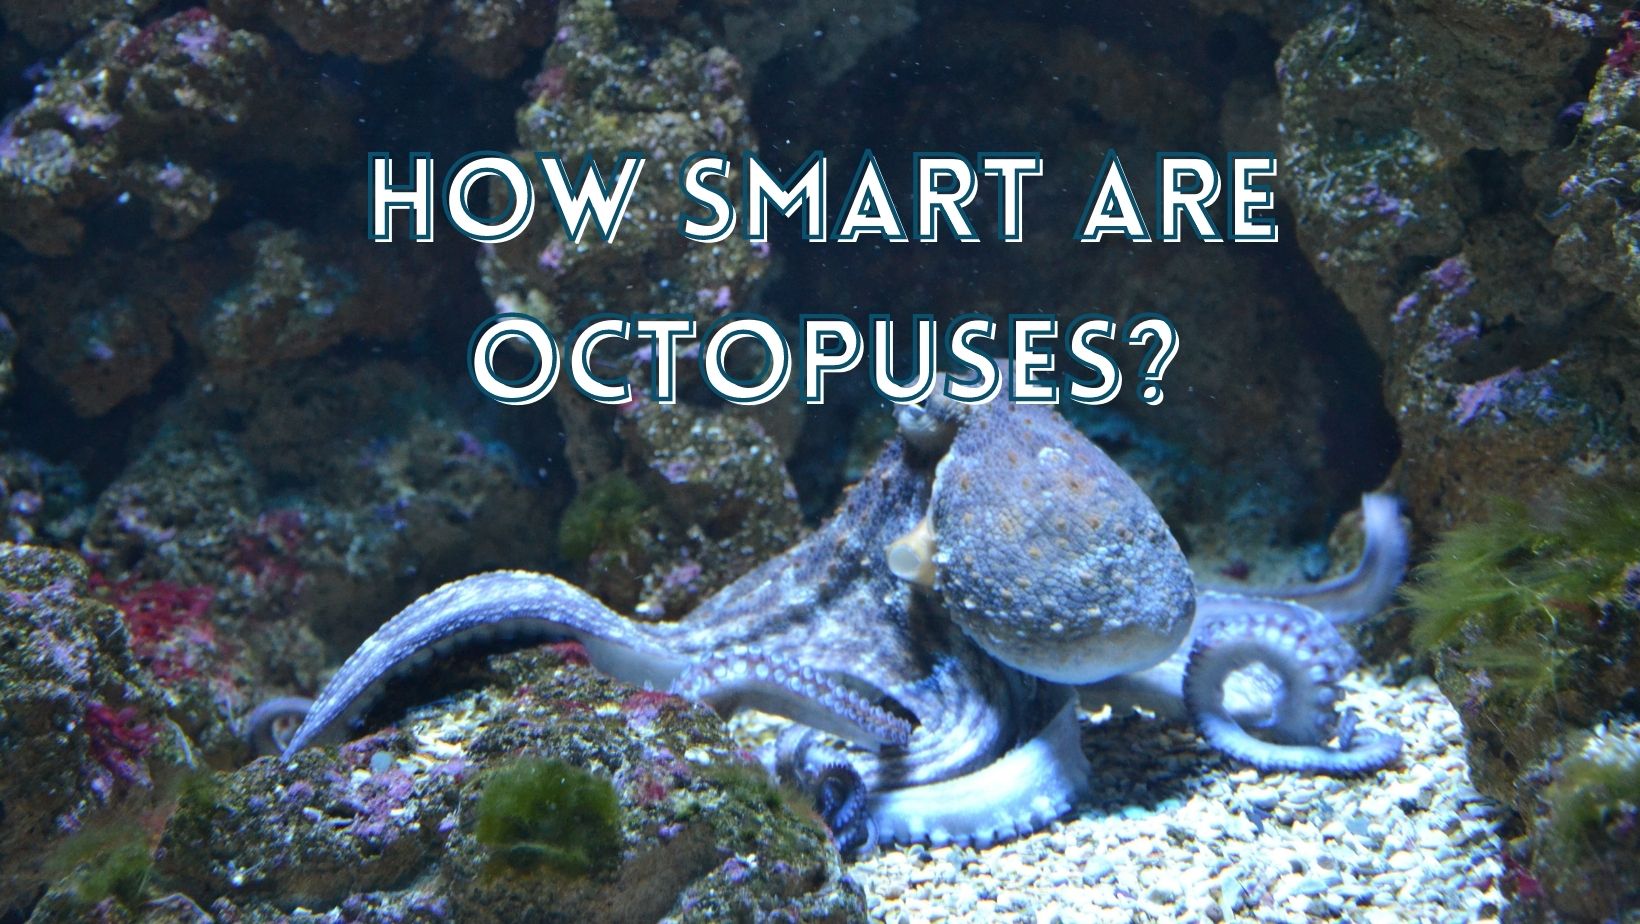 How smart are octopus